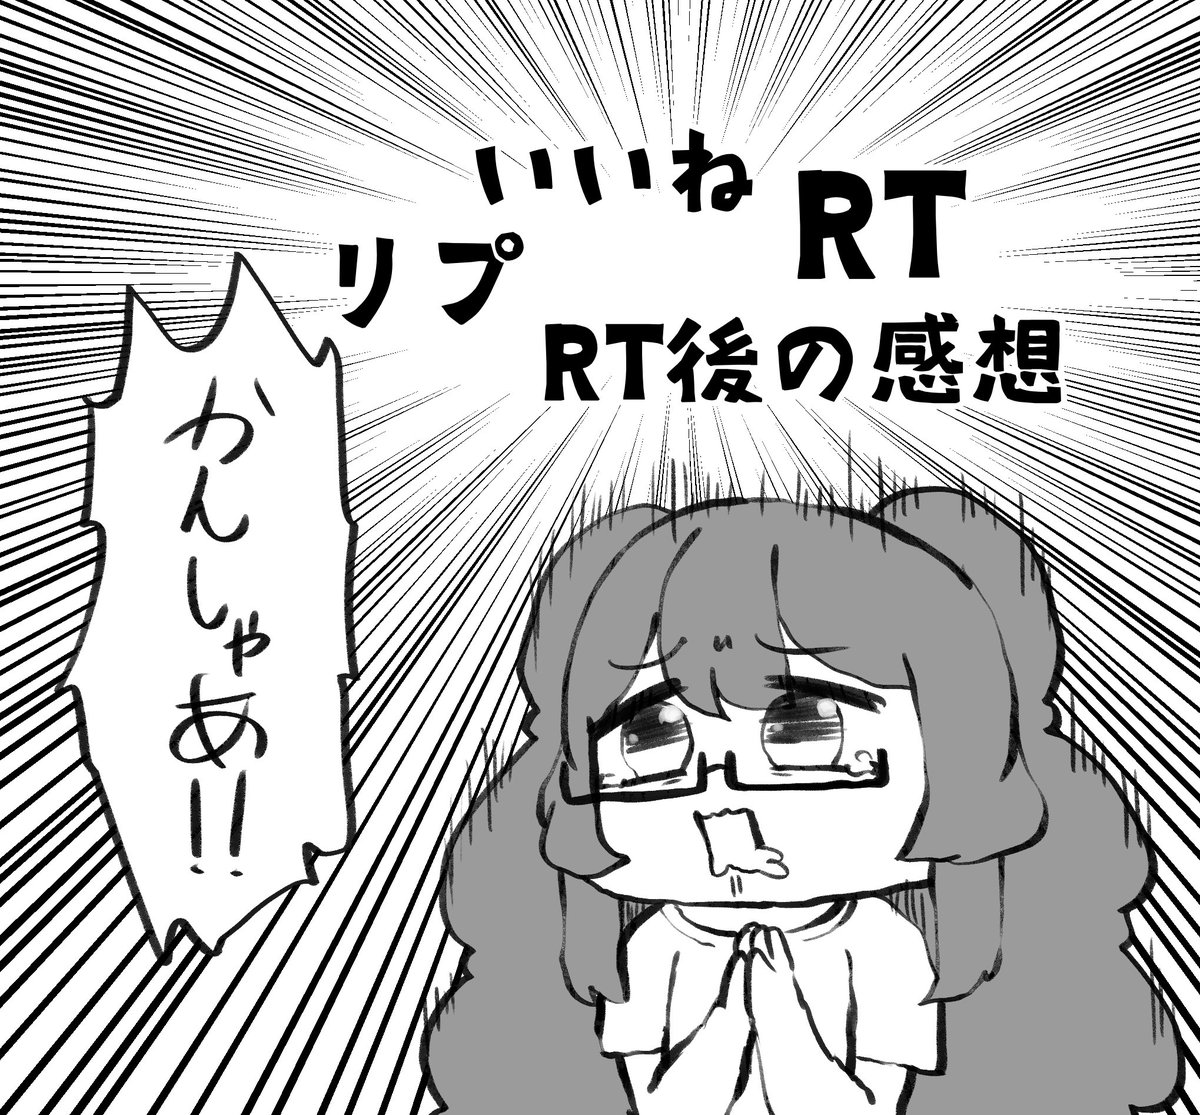 RT後の感想だ〜? 